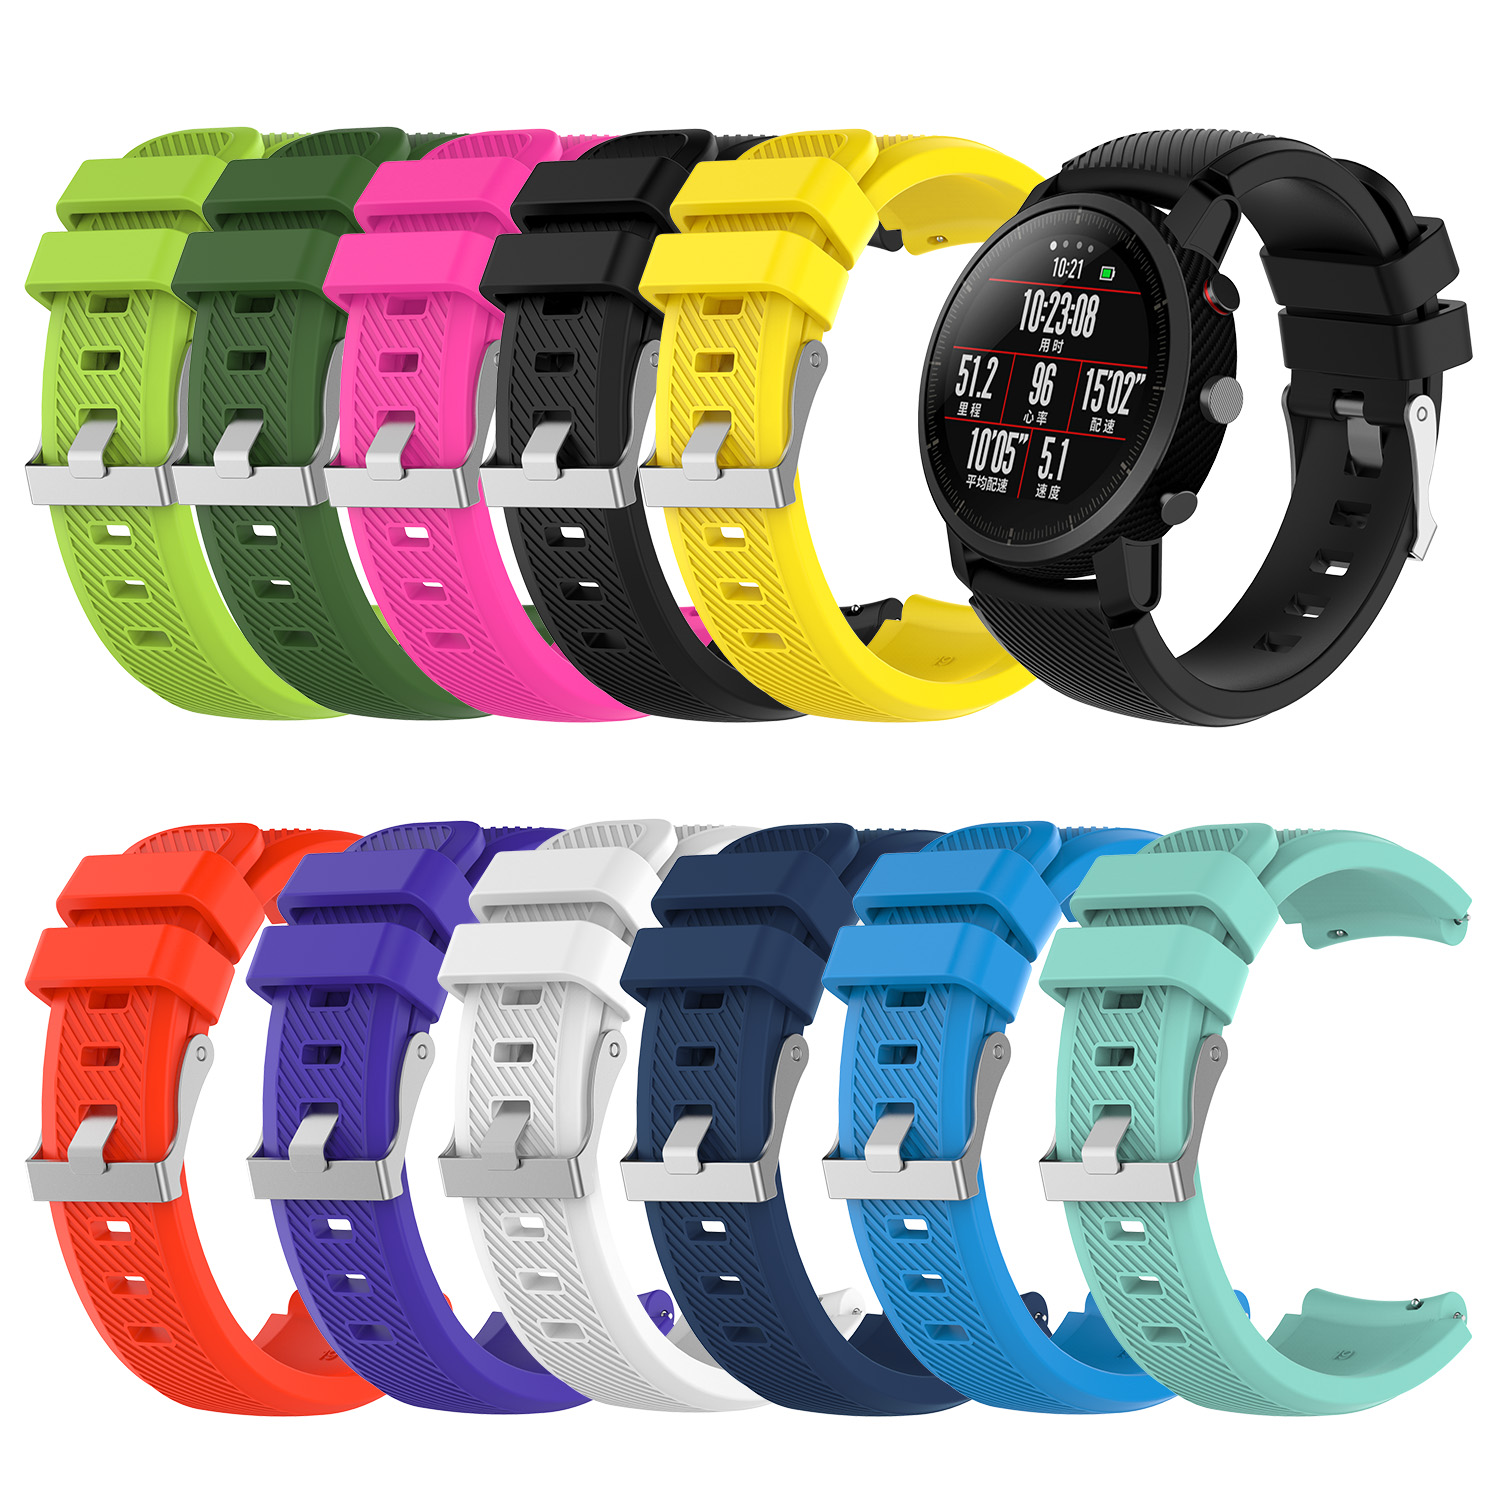 Bakeey-22mm-Universal-Watch-Band-Silicone-Watch-Strap-Replacement-for-HUAWEI-Watch-GT-1730954-1